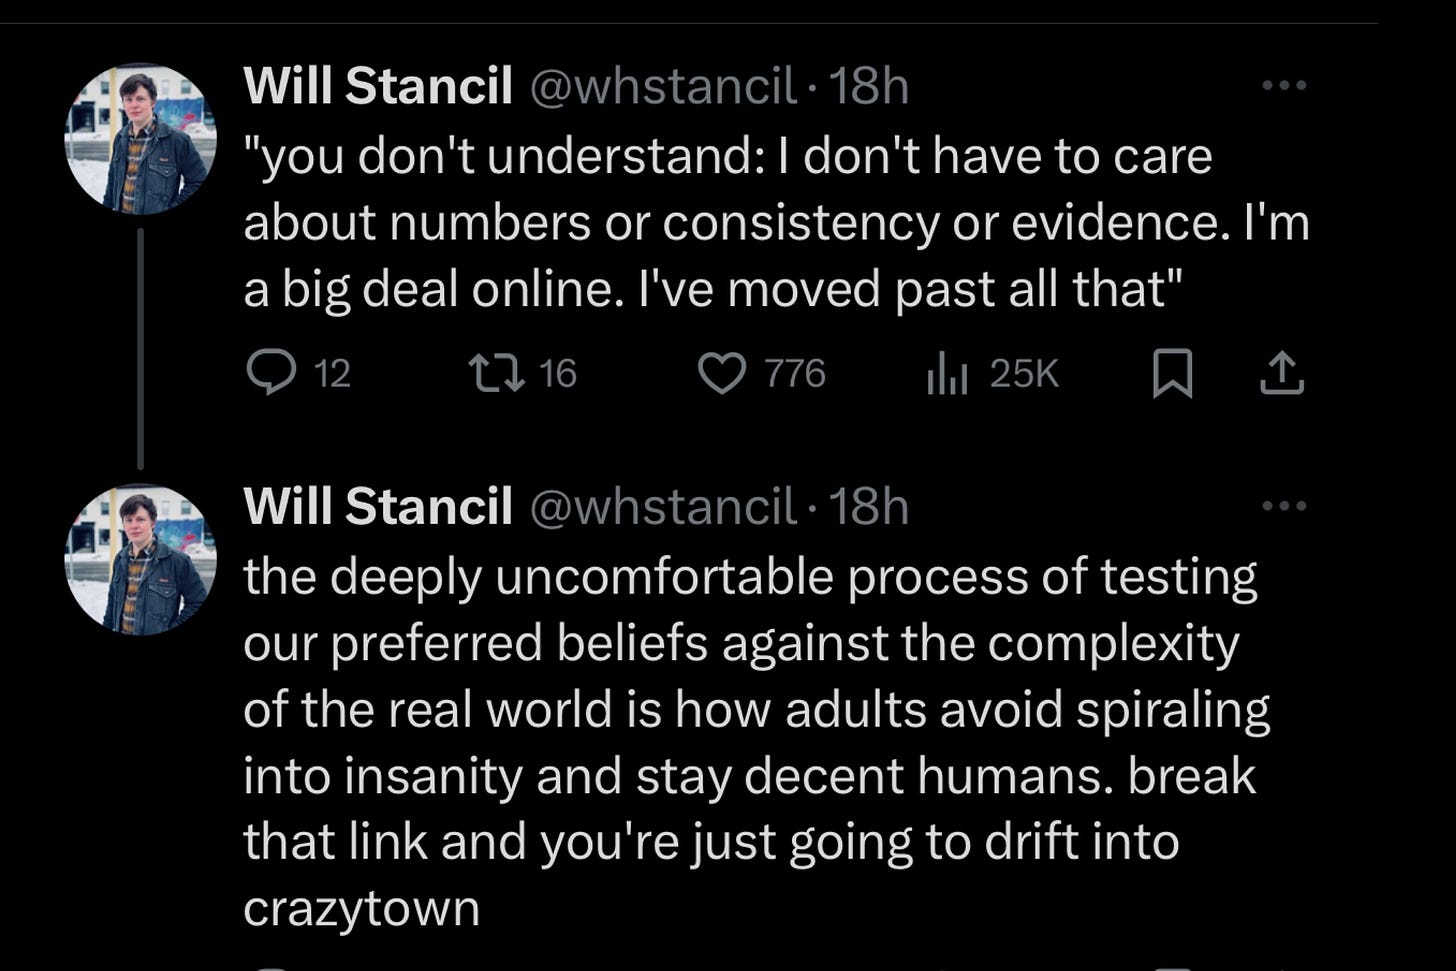 Screenshot of two follow-up tweets by William Stancil, continuing his discussion on empirical data and leftist activists.  Tweet 1: "you don't understand: I don't have to care about numbers or consistency or evidence. I'm a big deal online. I've moved past all that"  Tweet 2:  "the deeply uncomfortable process of testing our preferred beliefs against the complexity of the real world is how adults avoid spiraling into insanity and stay decent humans. break that link and you're just going to drift into crazytown"